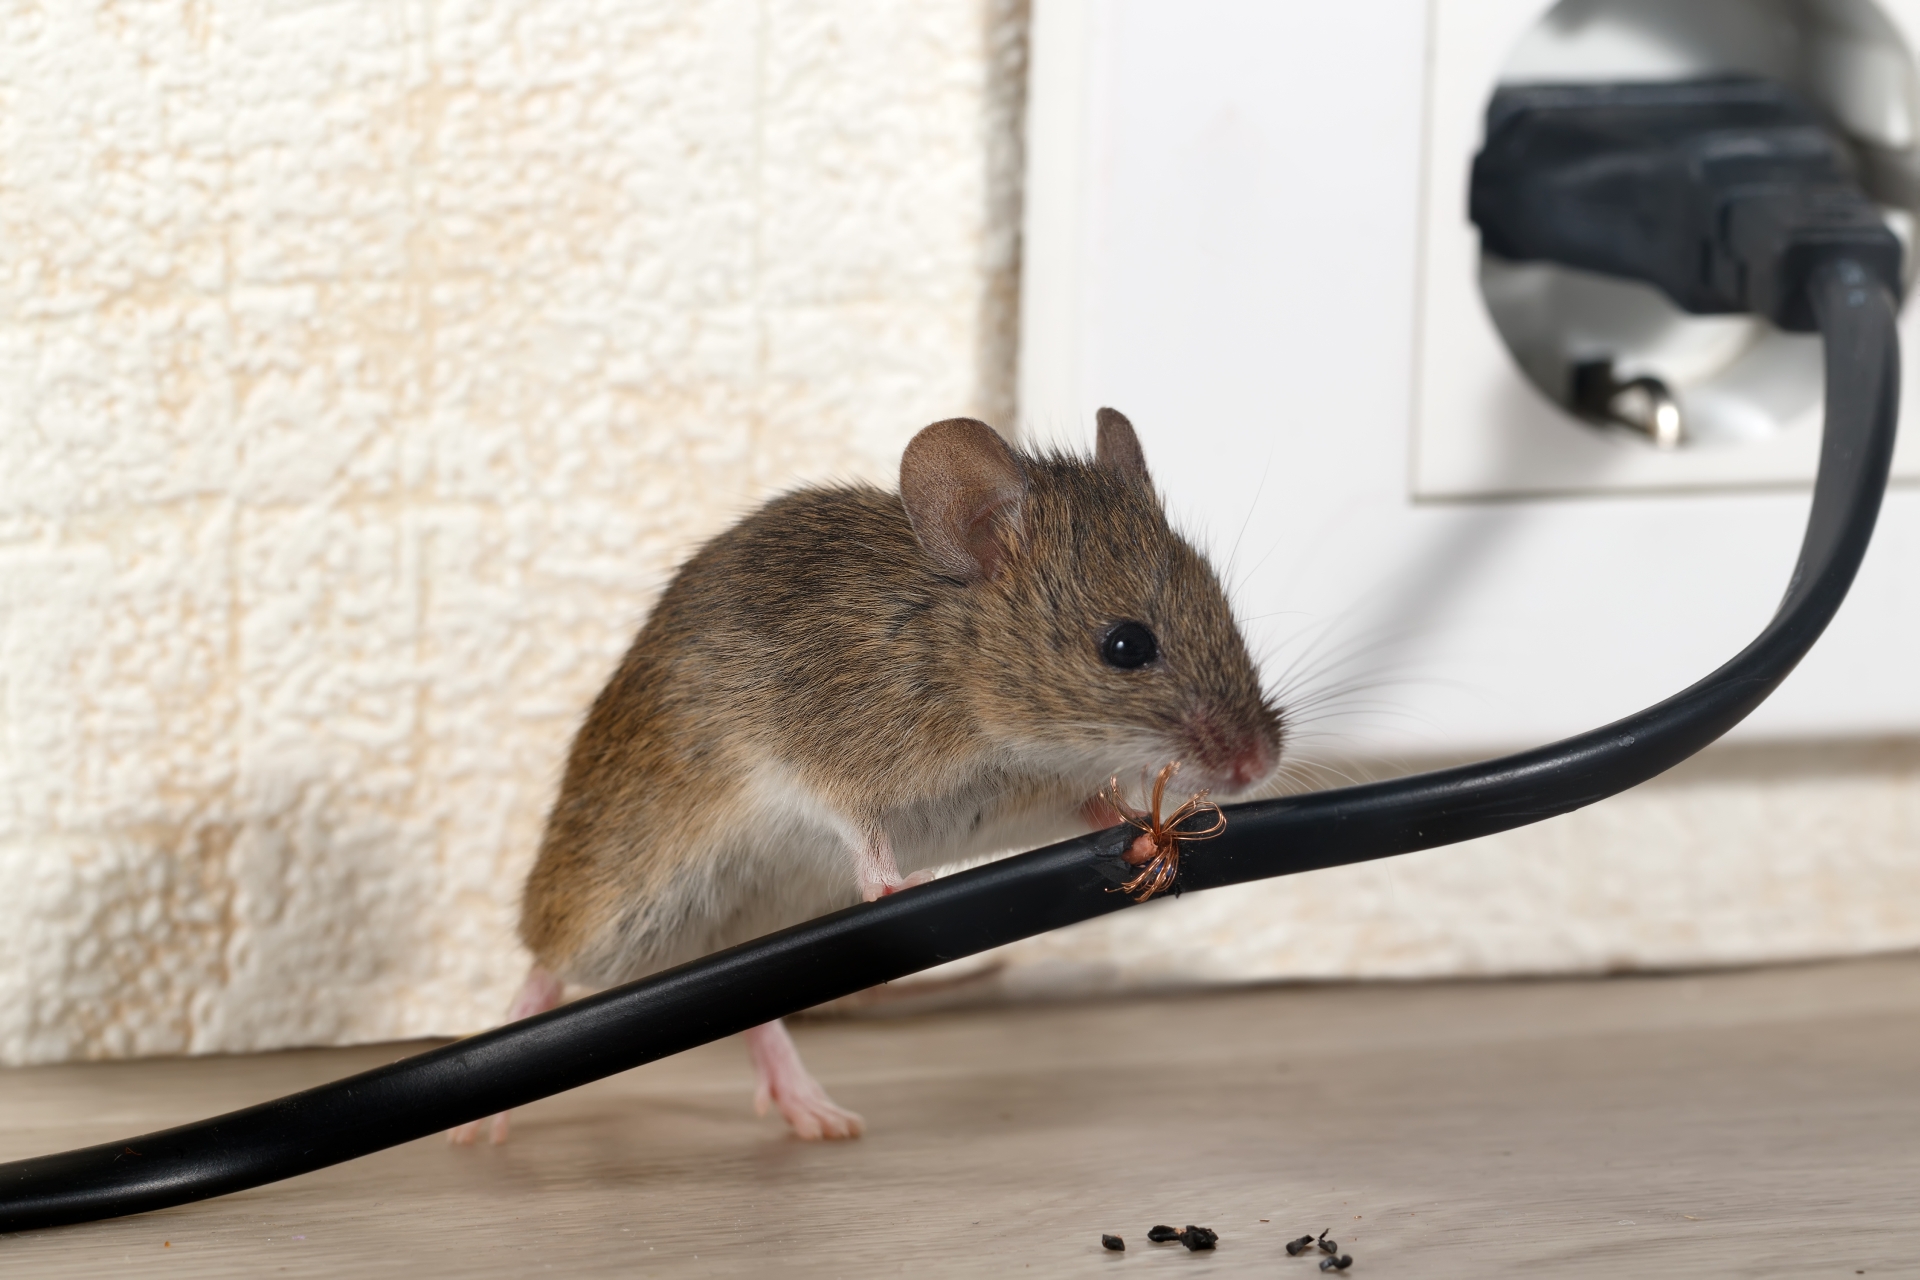 Mice Infestation, Pest Control in Surbiton, Long Ditton, KT6. Call Now 020 8166 9746